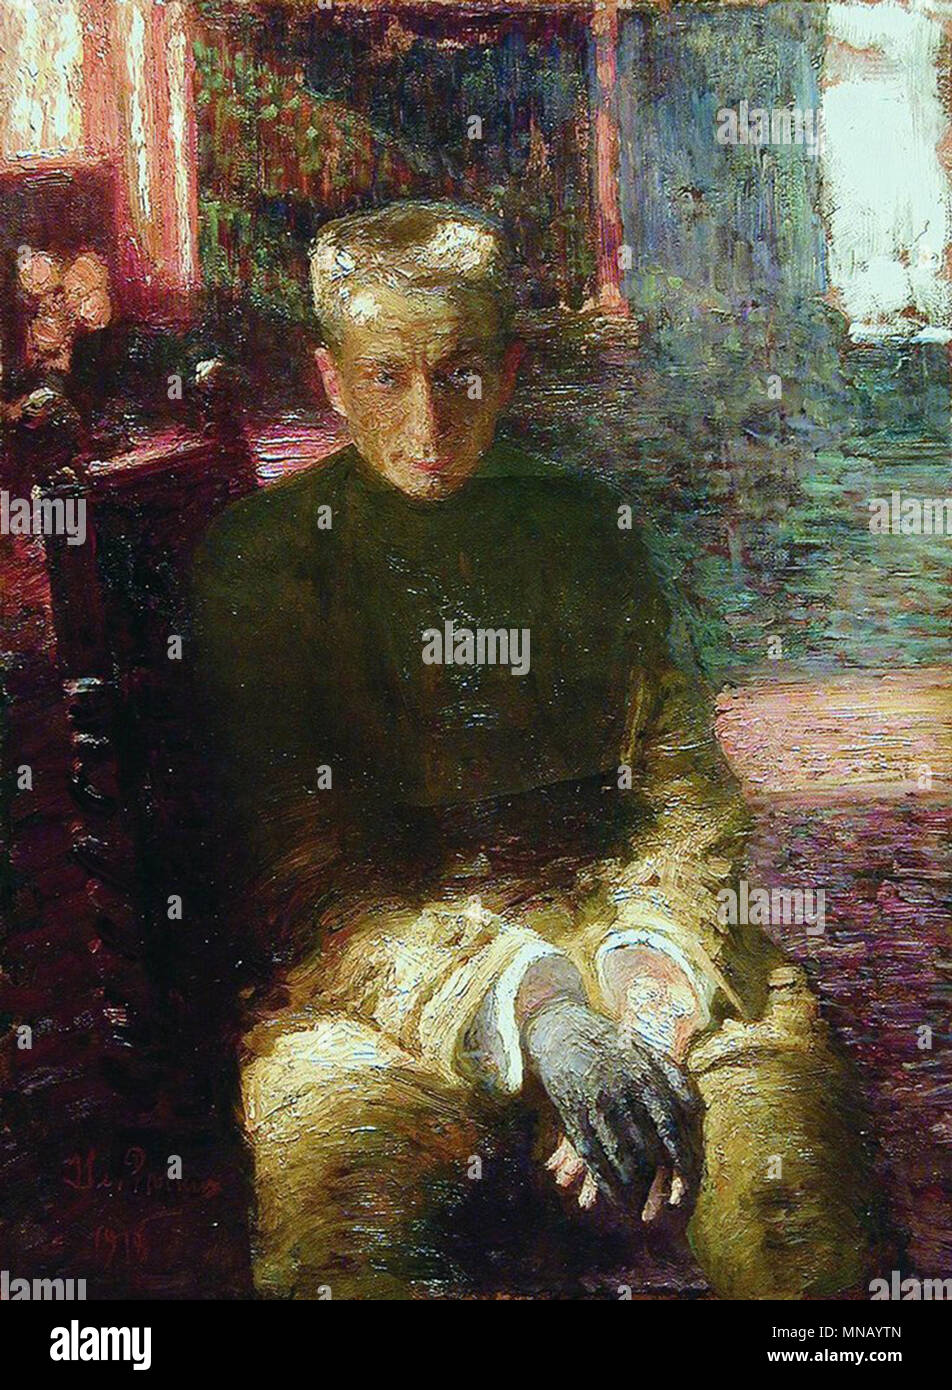 Alexander Fyodorovich Kerensky (1881 – 1970) Russian revolutionary who was a key political figure in the Russian Revolution of 1917. Portrait of Alexander Kerensky (1917) by Ilya Repin, Stock Photo